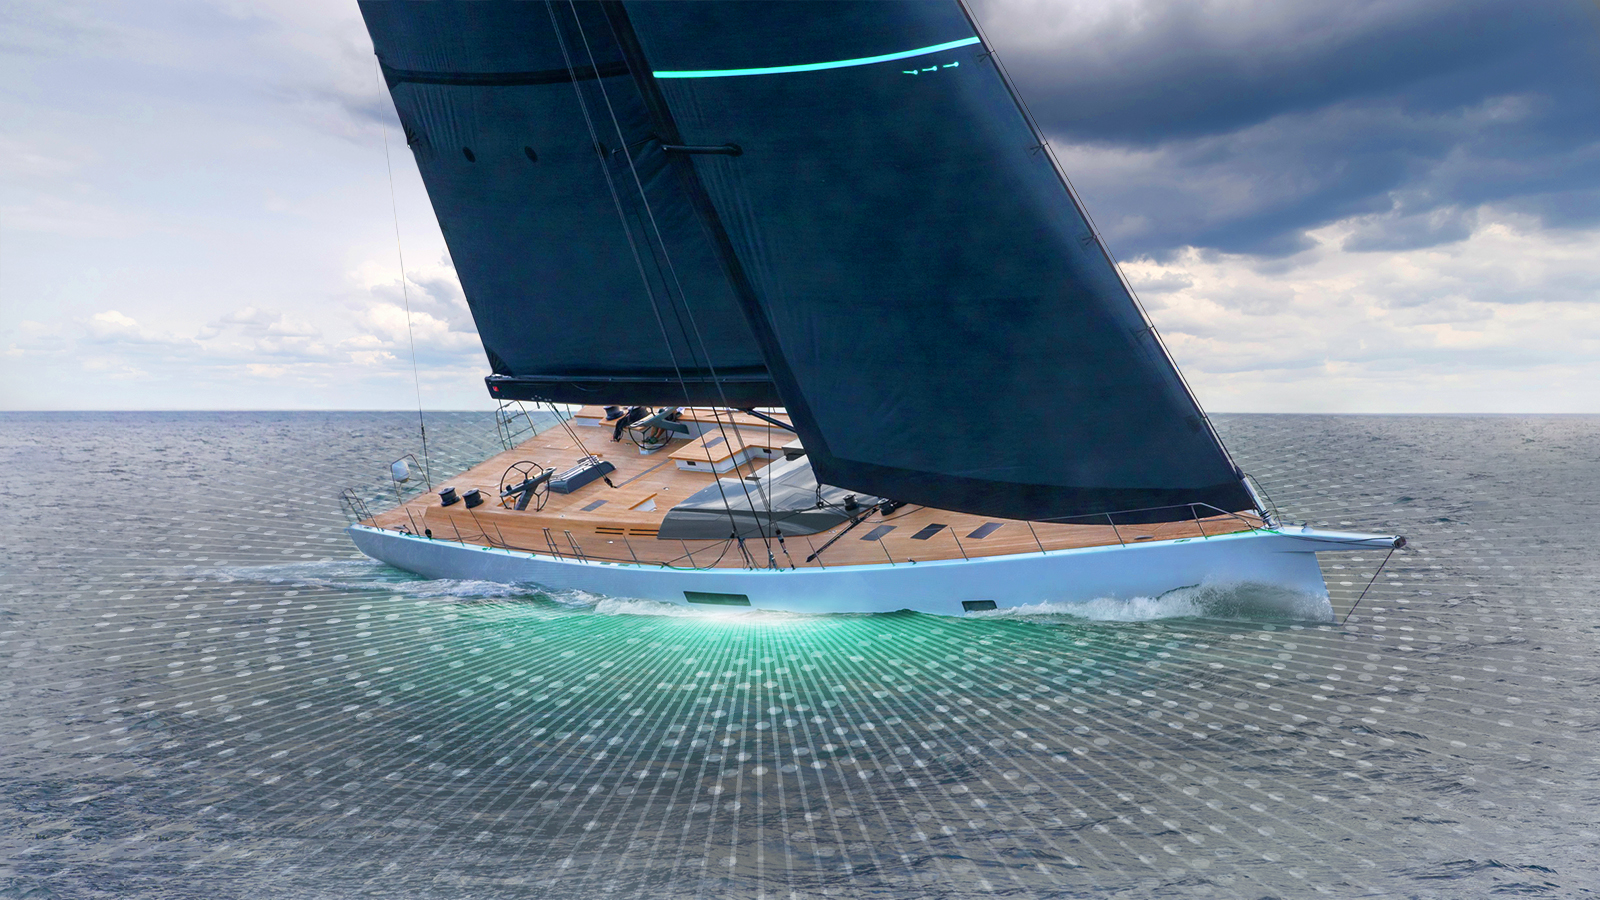 BAE Systems selected to supply and integrate its next-generation system on a new high-performance superyacht.